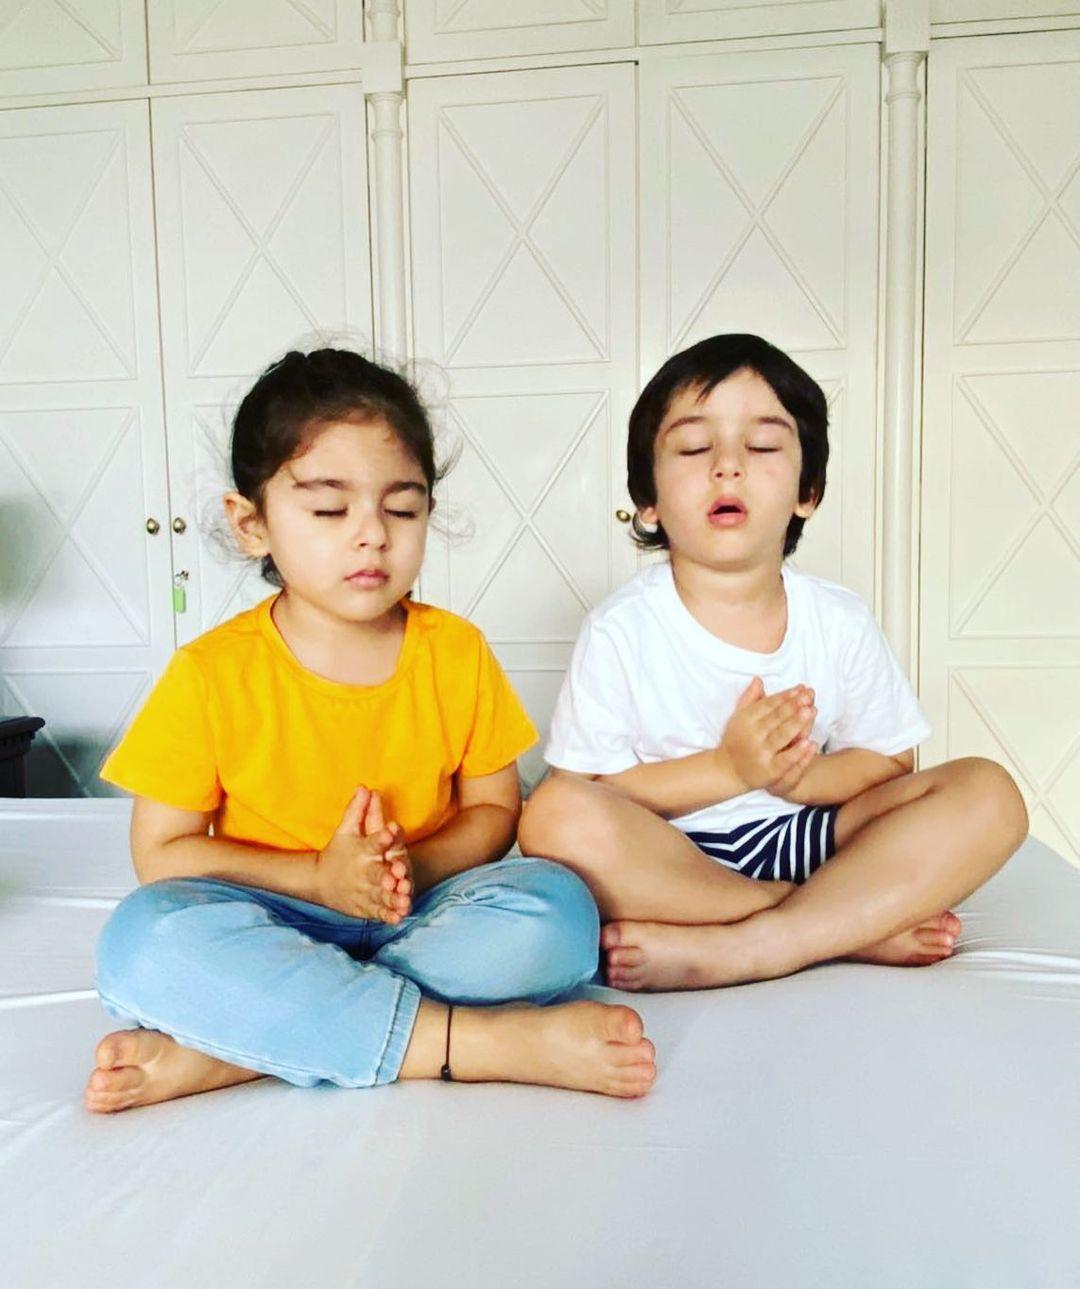 Inaaya and Taimur, the youngest scions of the illustrious Pataudi-Khan-Kapoor family, share a bond that's nothing short of heartwarming. These adorable cousins, born just a few months apart, have been inseparable since day one. 